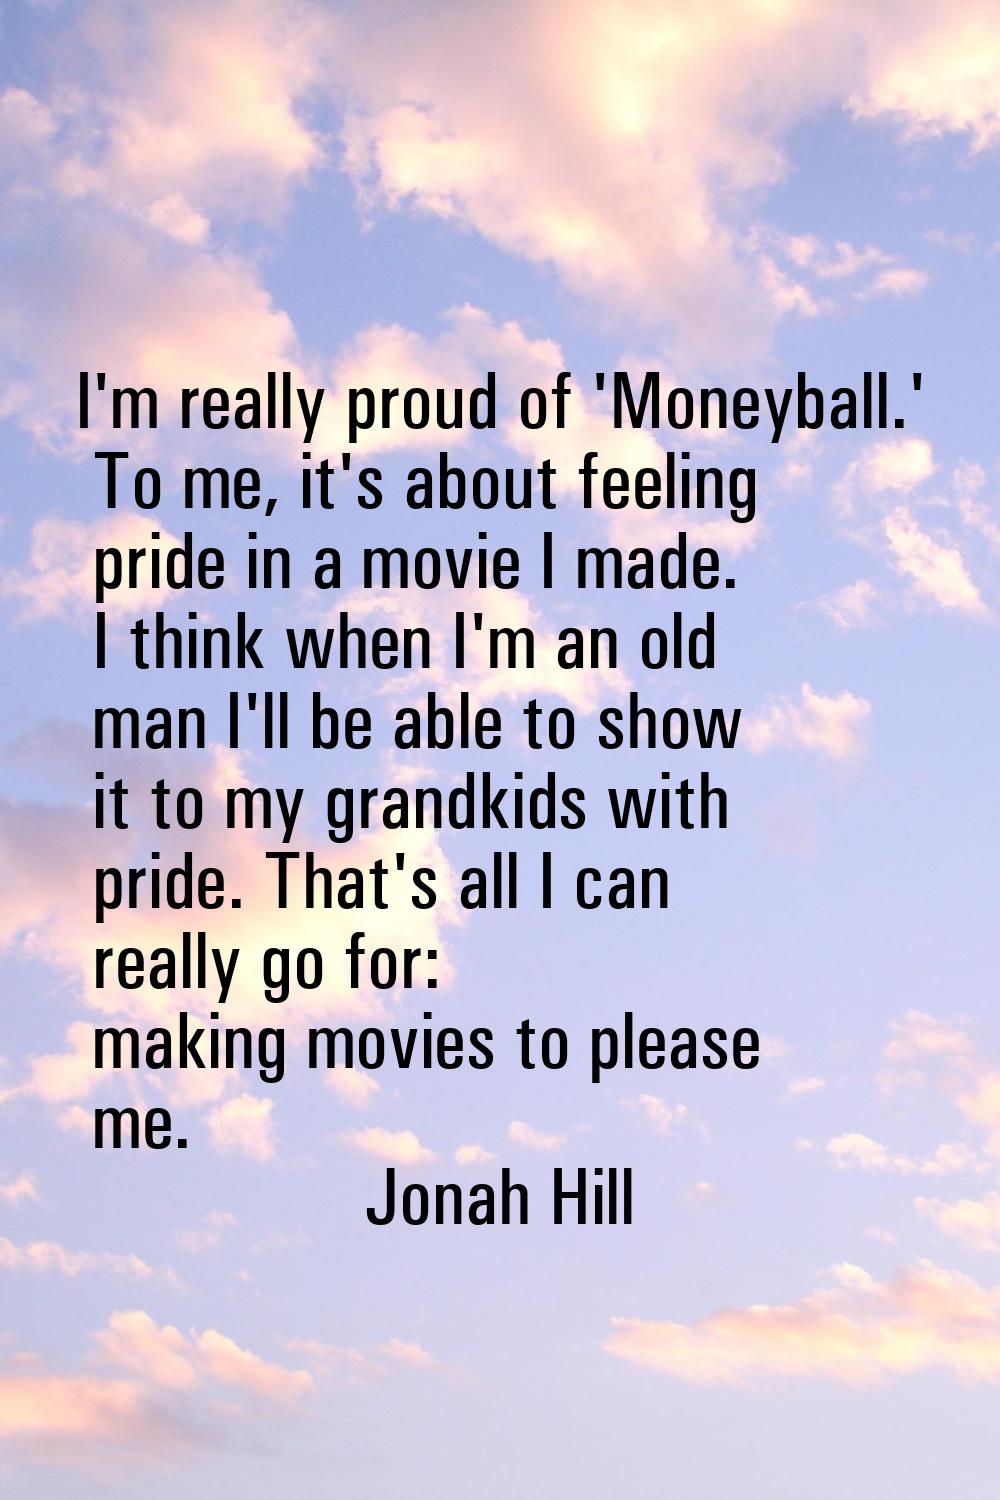 I'm really proud of 'Moneyball.' To me, it's about feeling pride in a movie I made. I think when I'